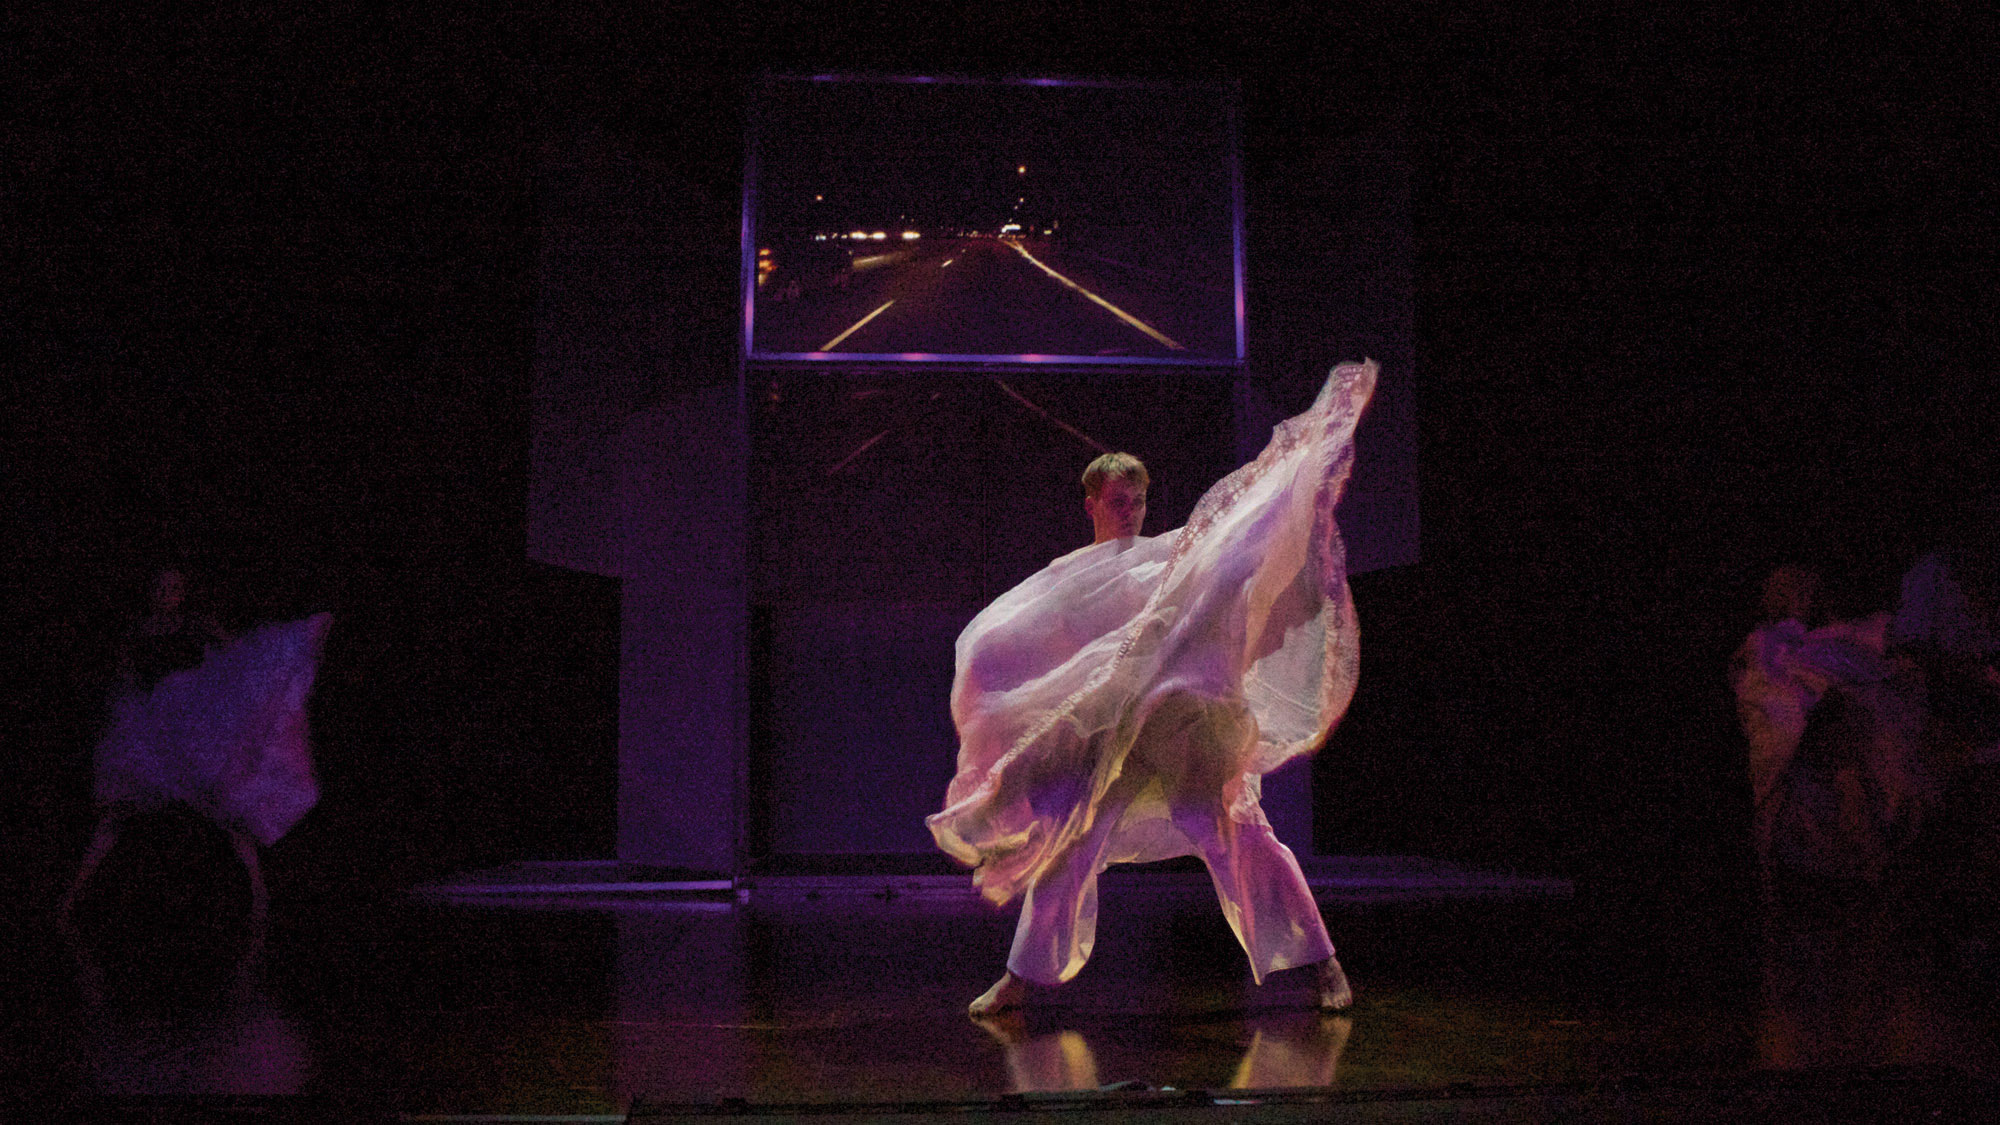 A male dancer wearing a sheer white flowing costume dances with an arm outstretched on a dark purple lit stage infant of a small screen projecting a road. 